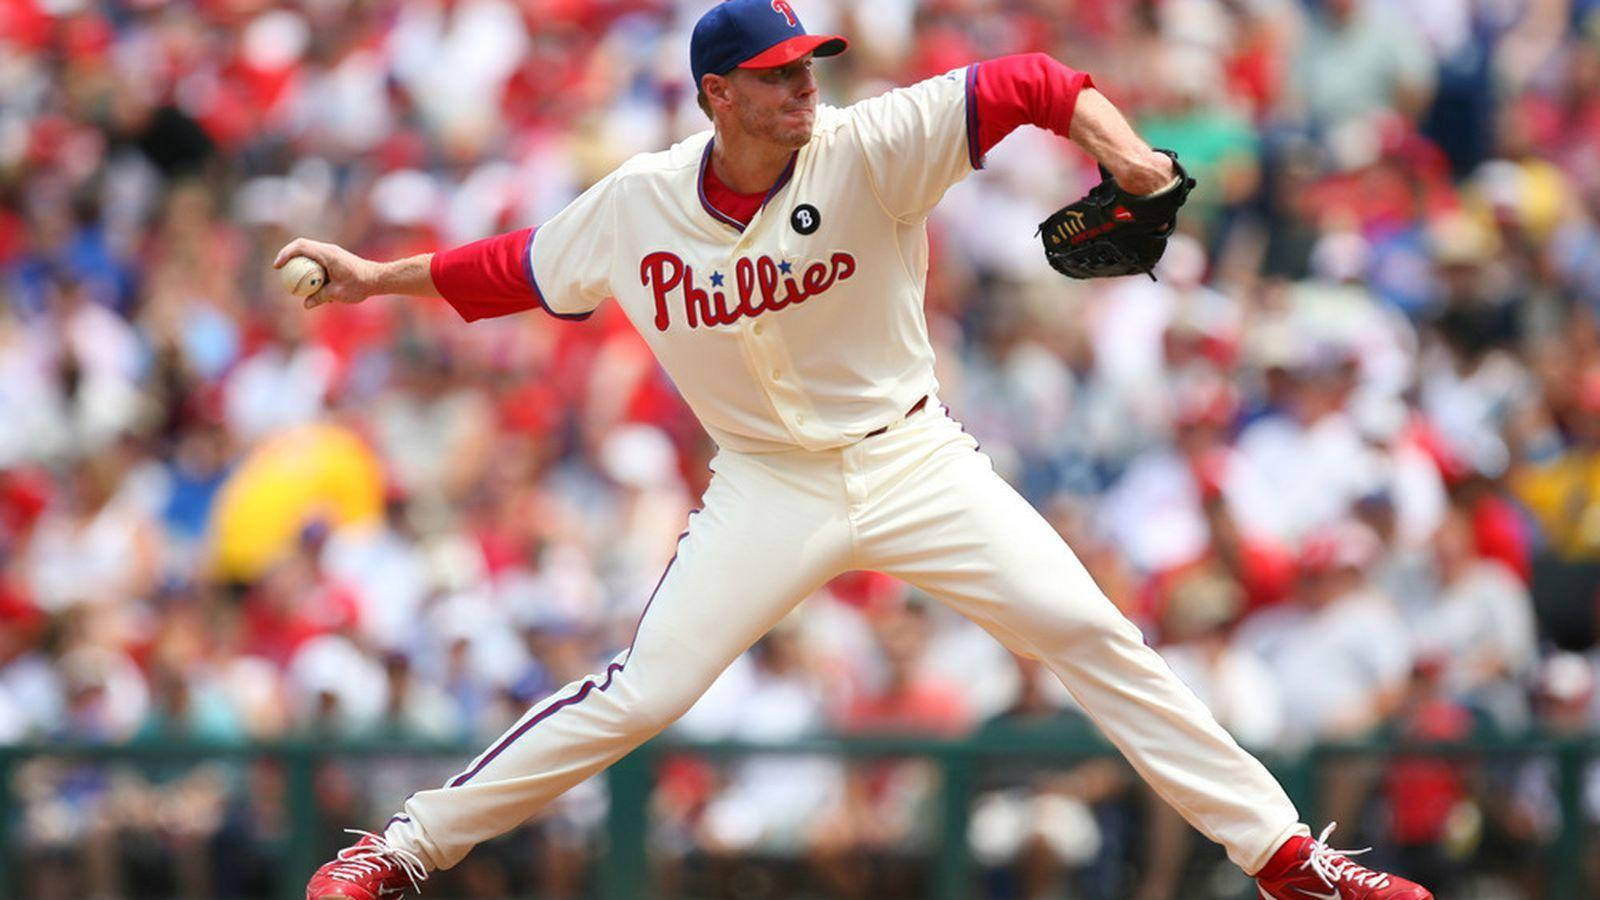 Roy Halladay Playing In Front Of Crowd Wallpaper